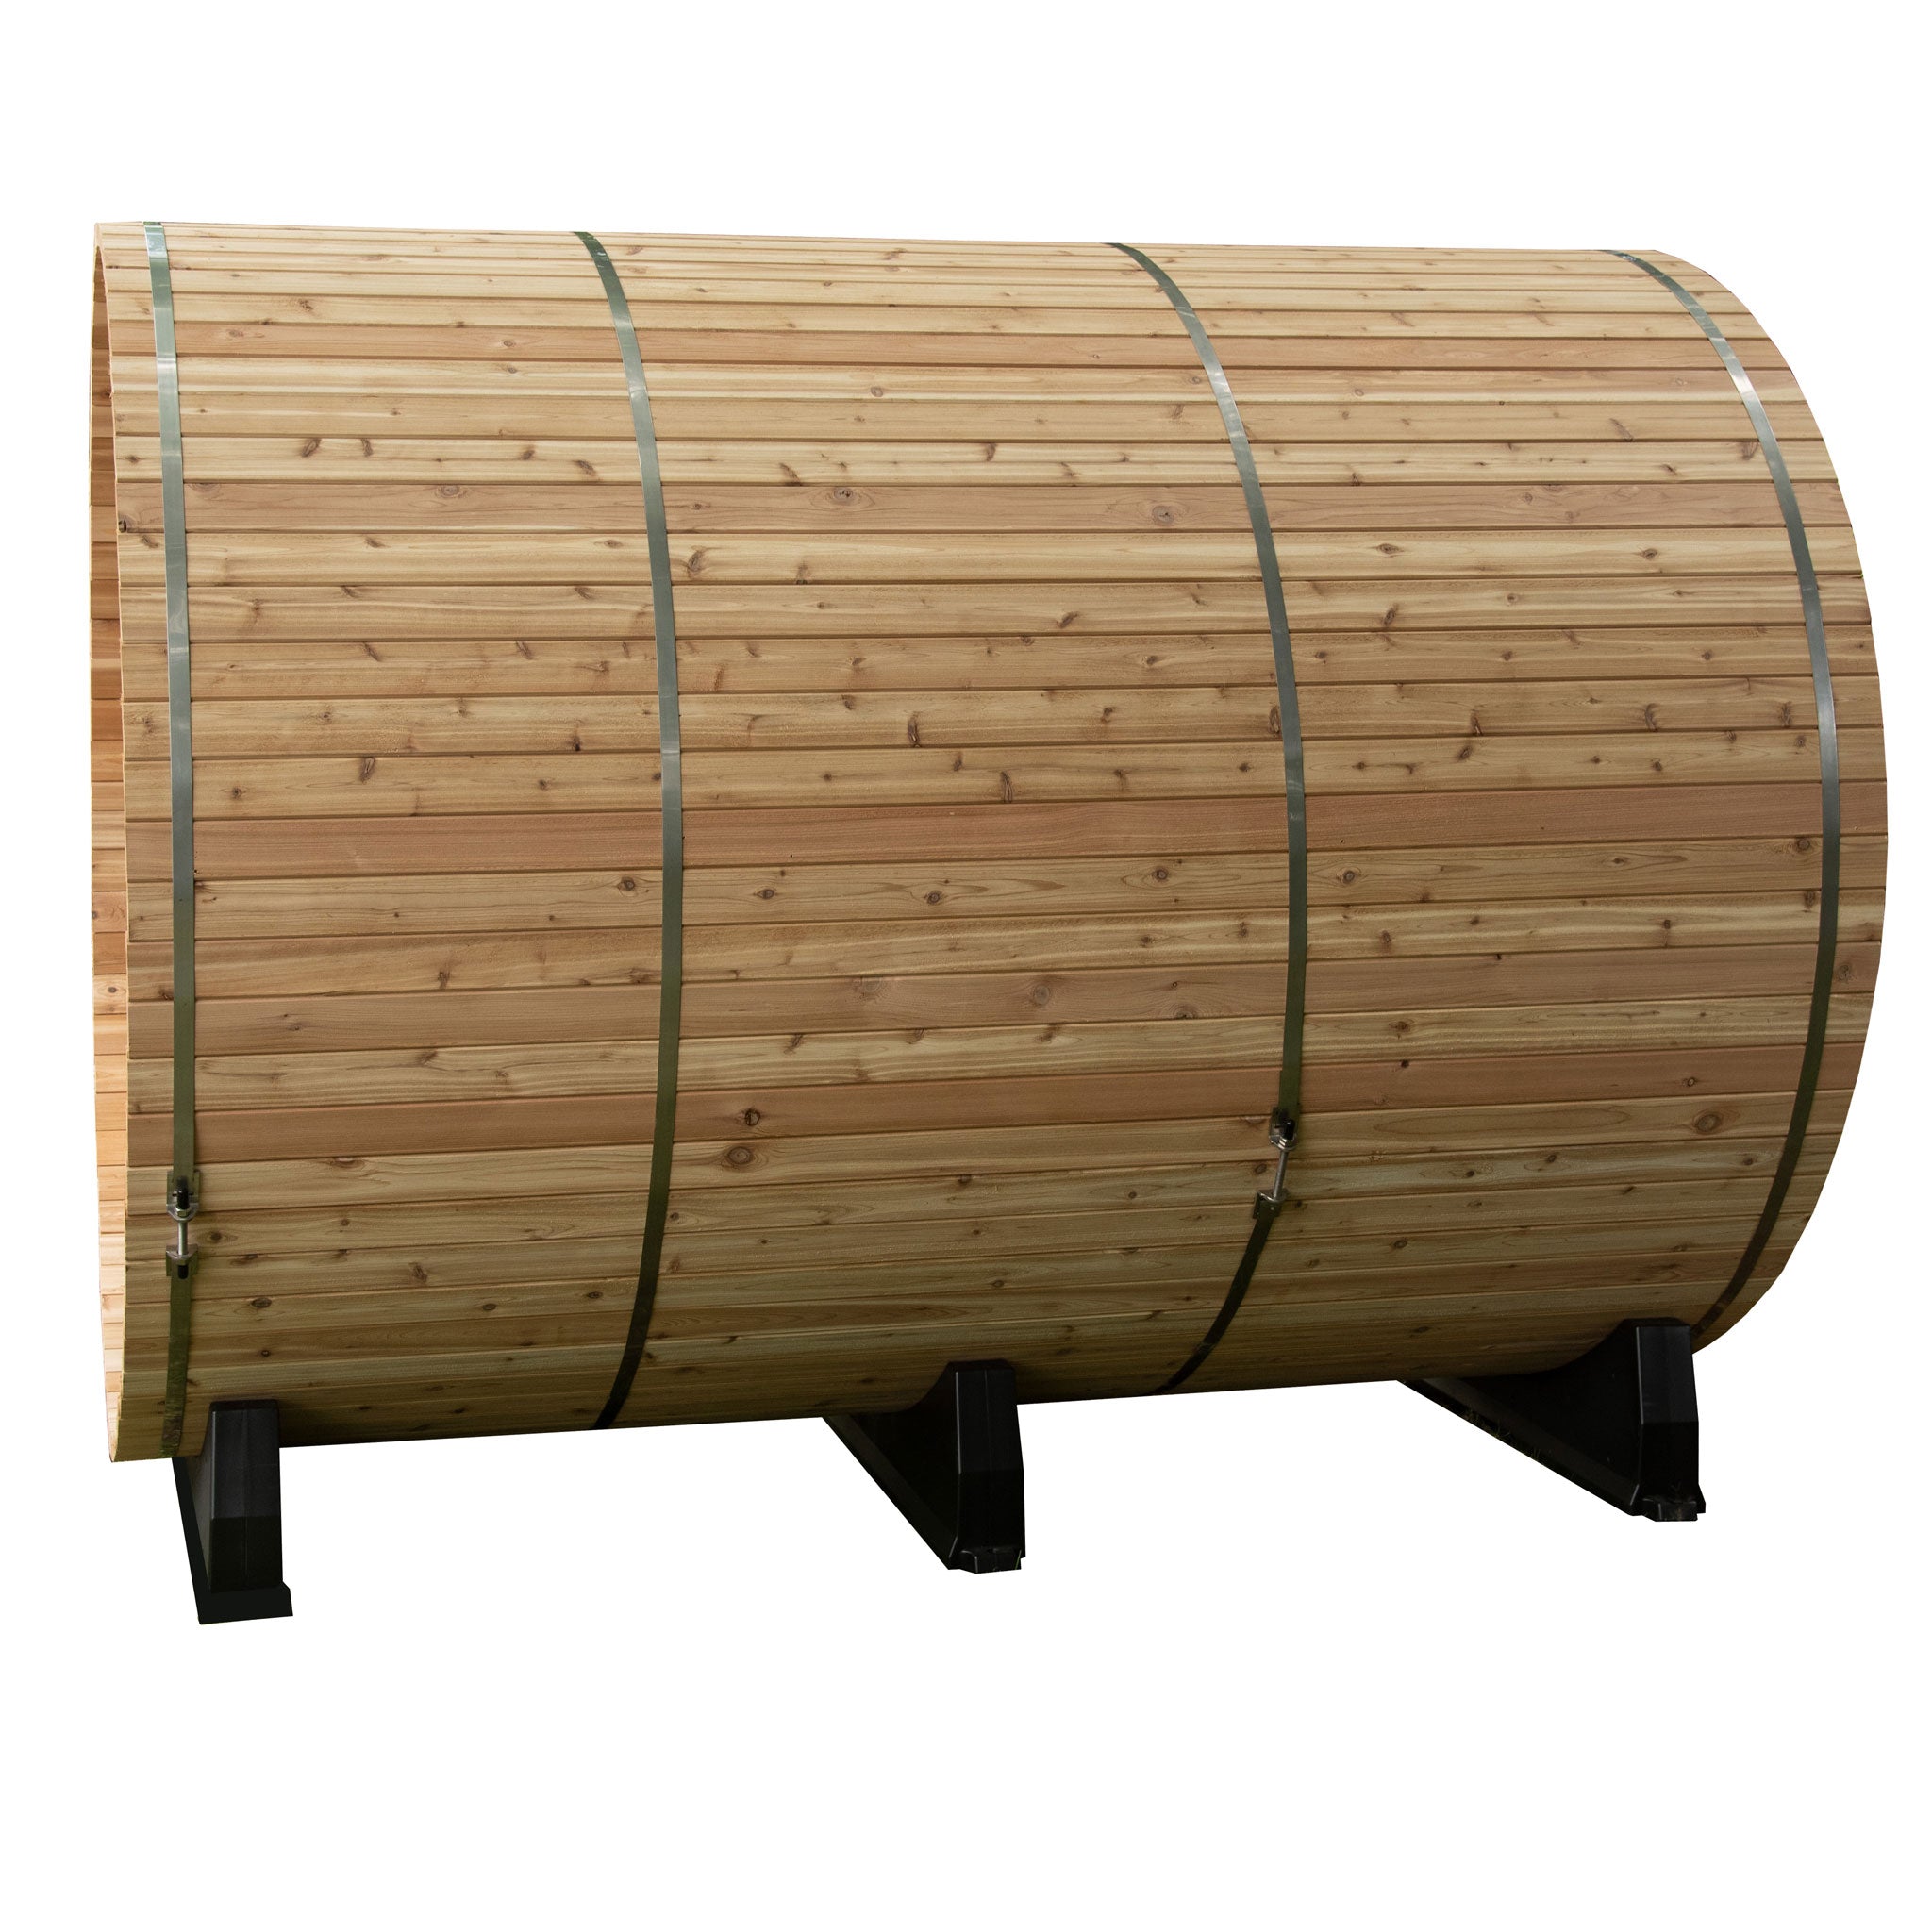 Charleston 4 Person Canopy Barrel Sauna with Premium Cedar Wood and Integrated Heater System